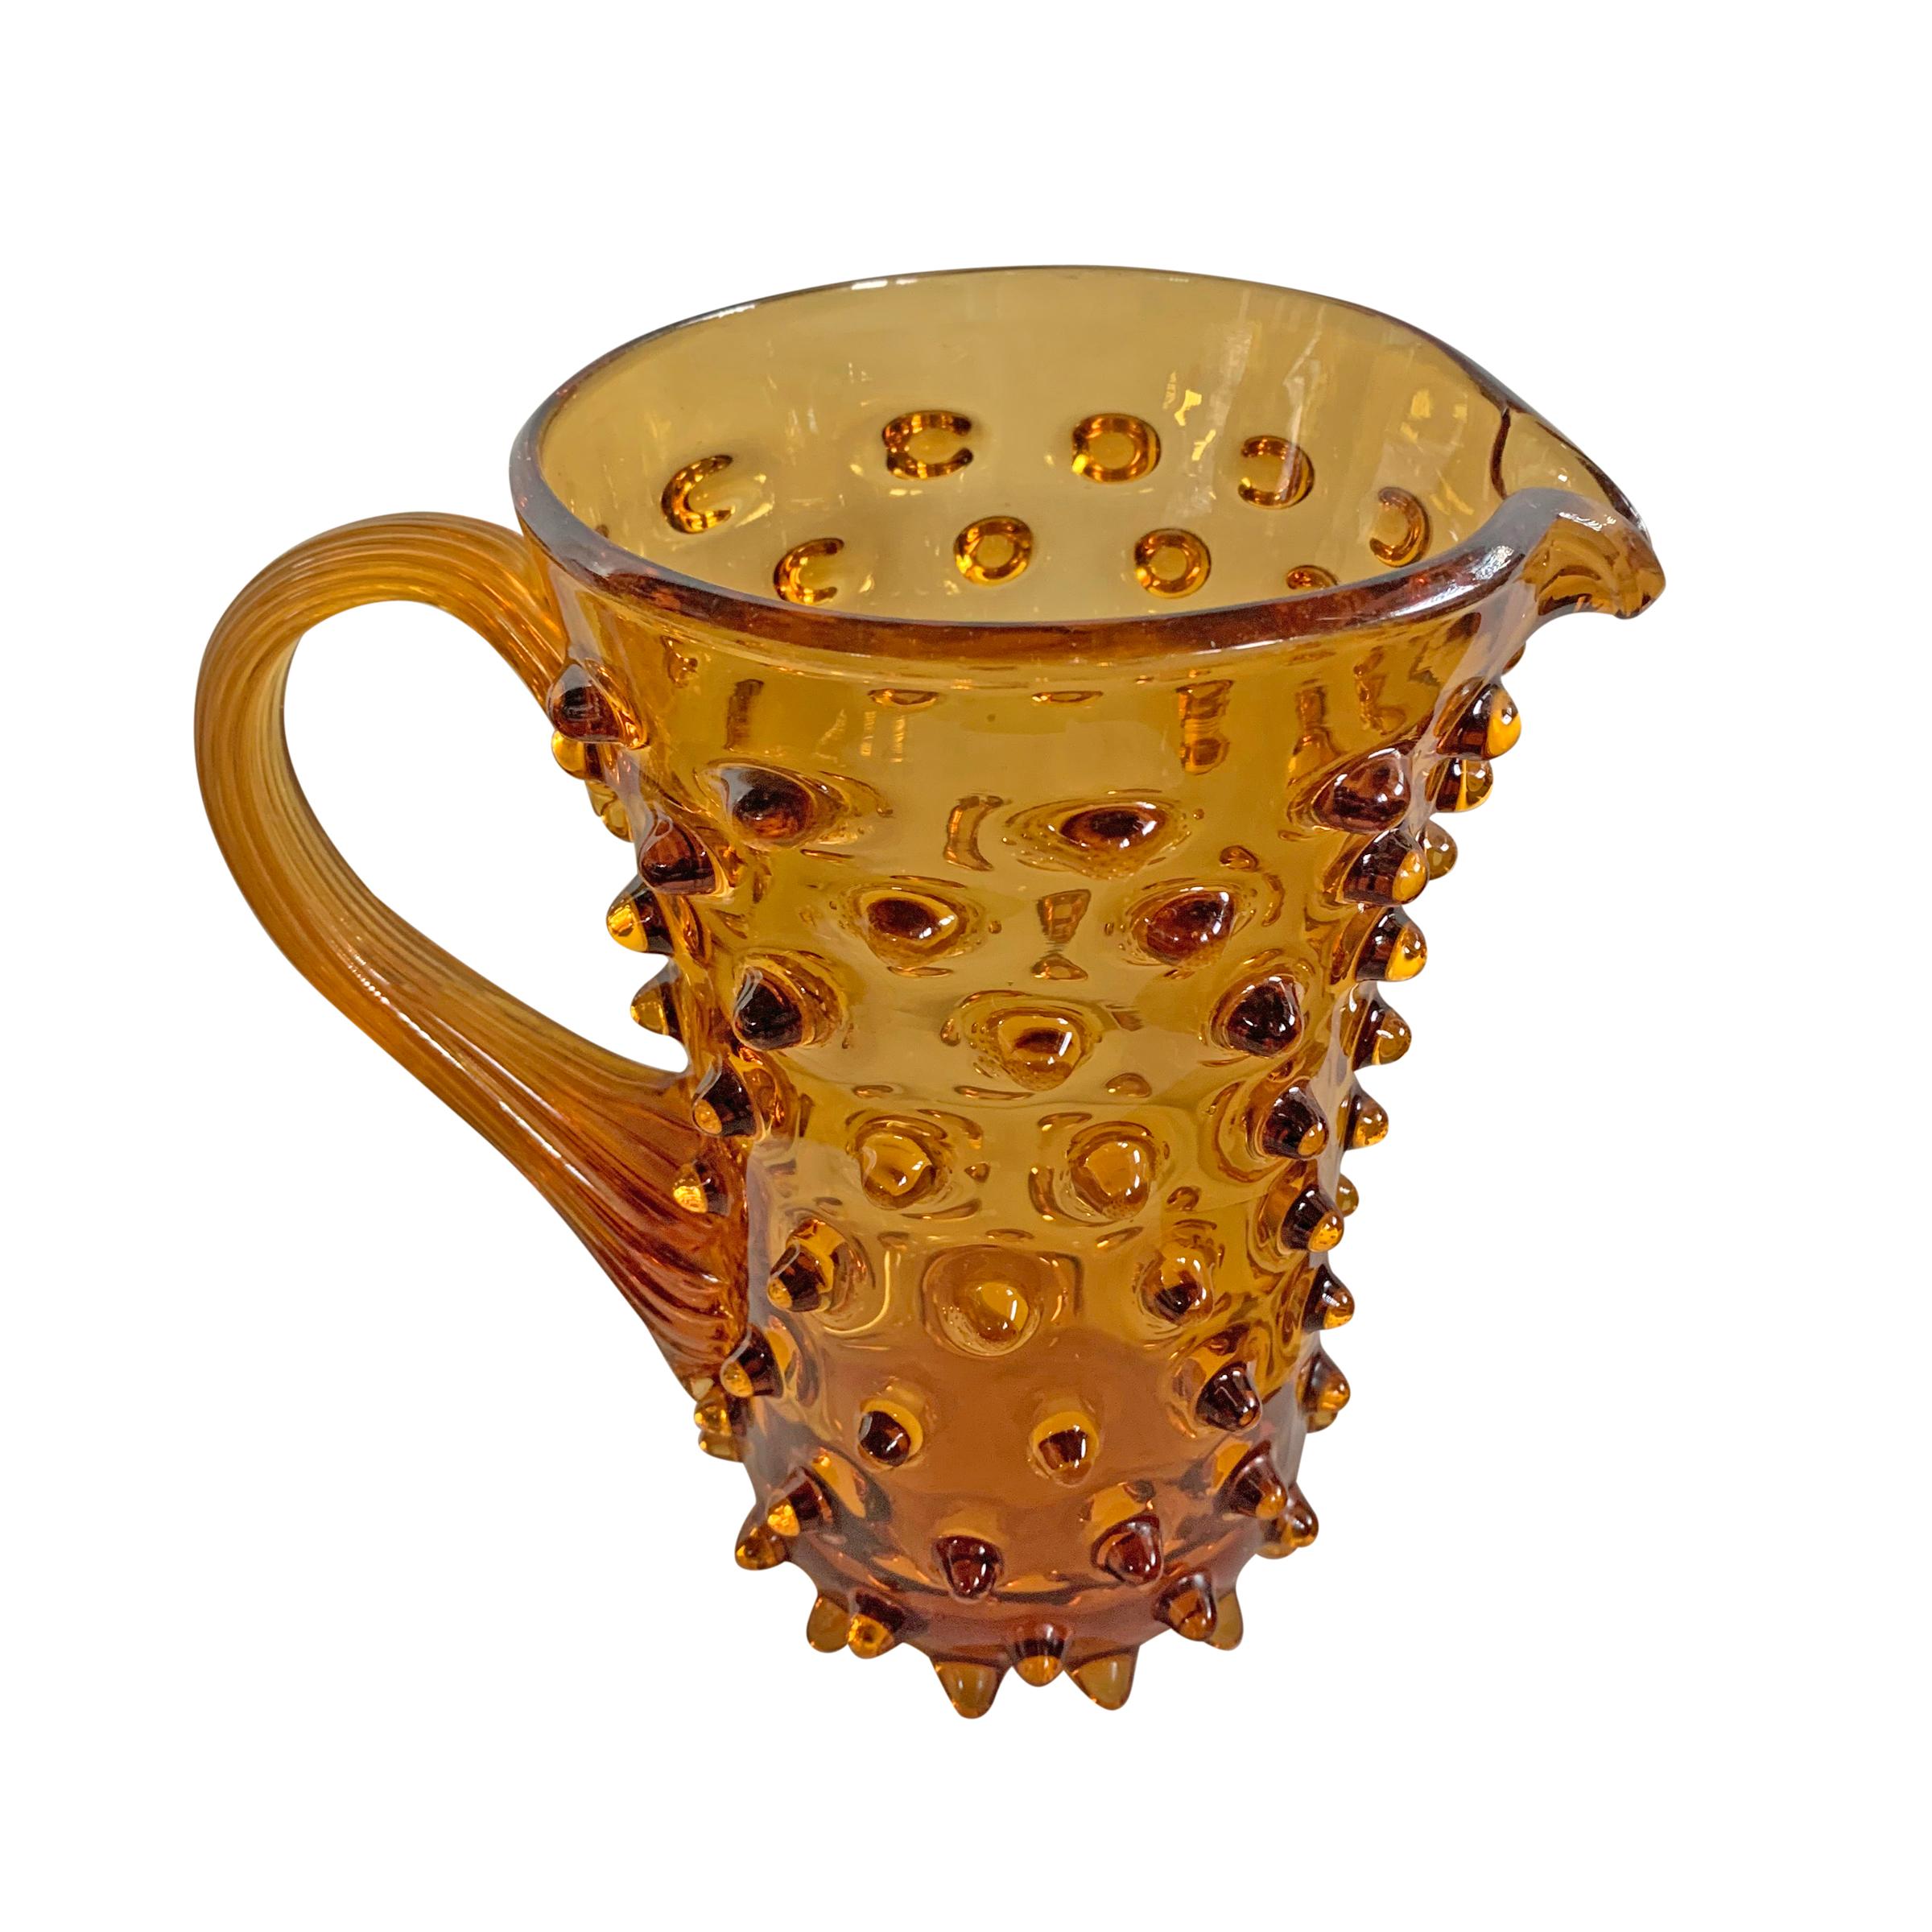 A fantastic hand blown mid-20th century American amber glass pitchers with an all-over hobnail design, and a wonderful pulled glass handle.